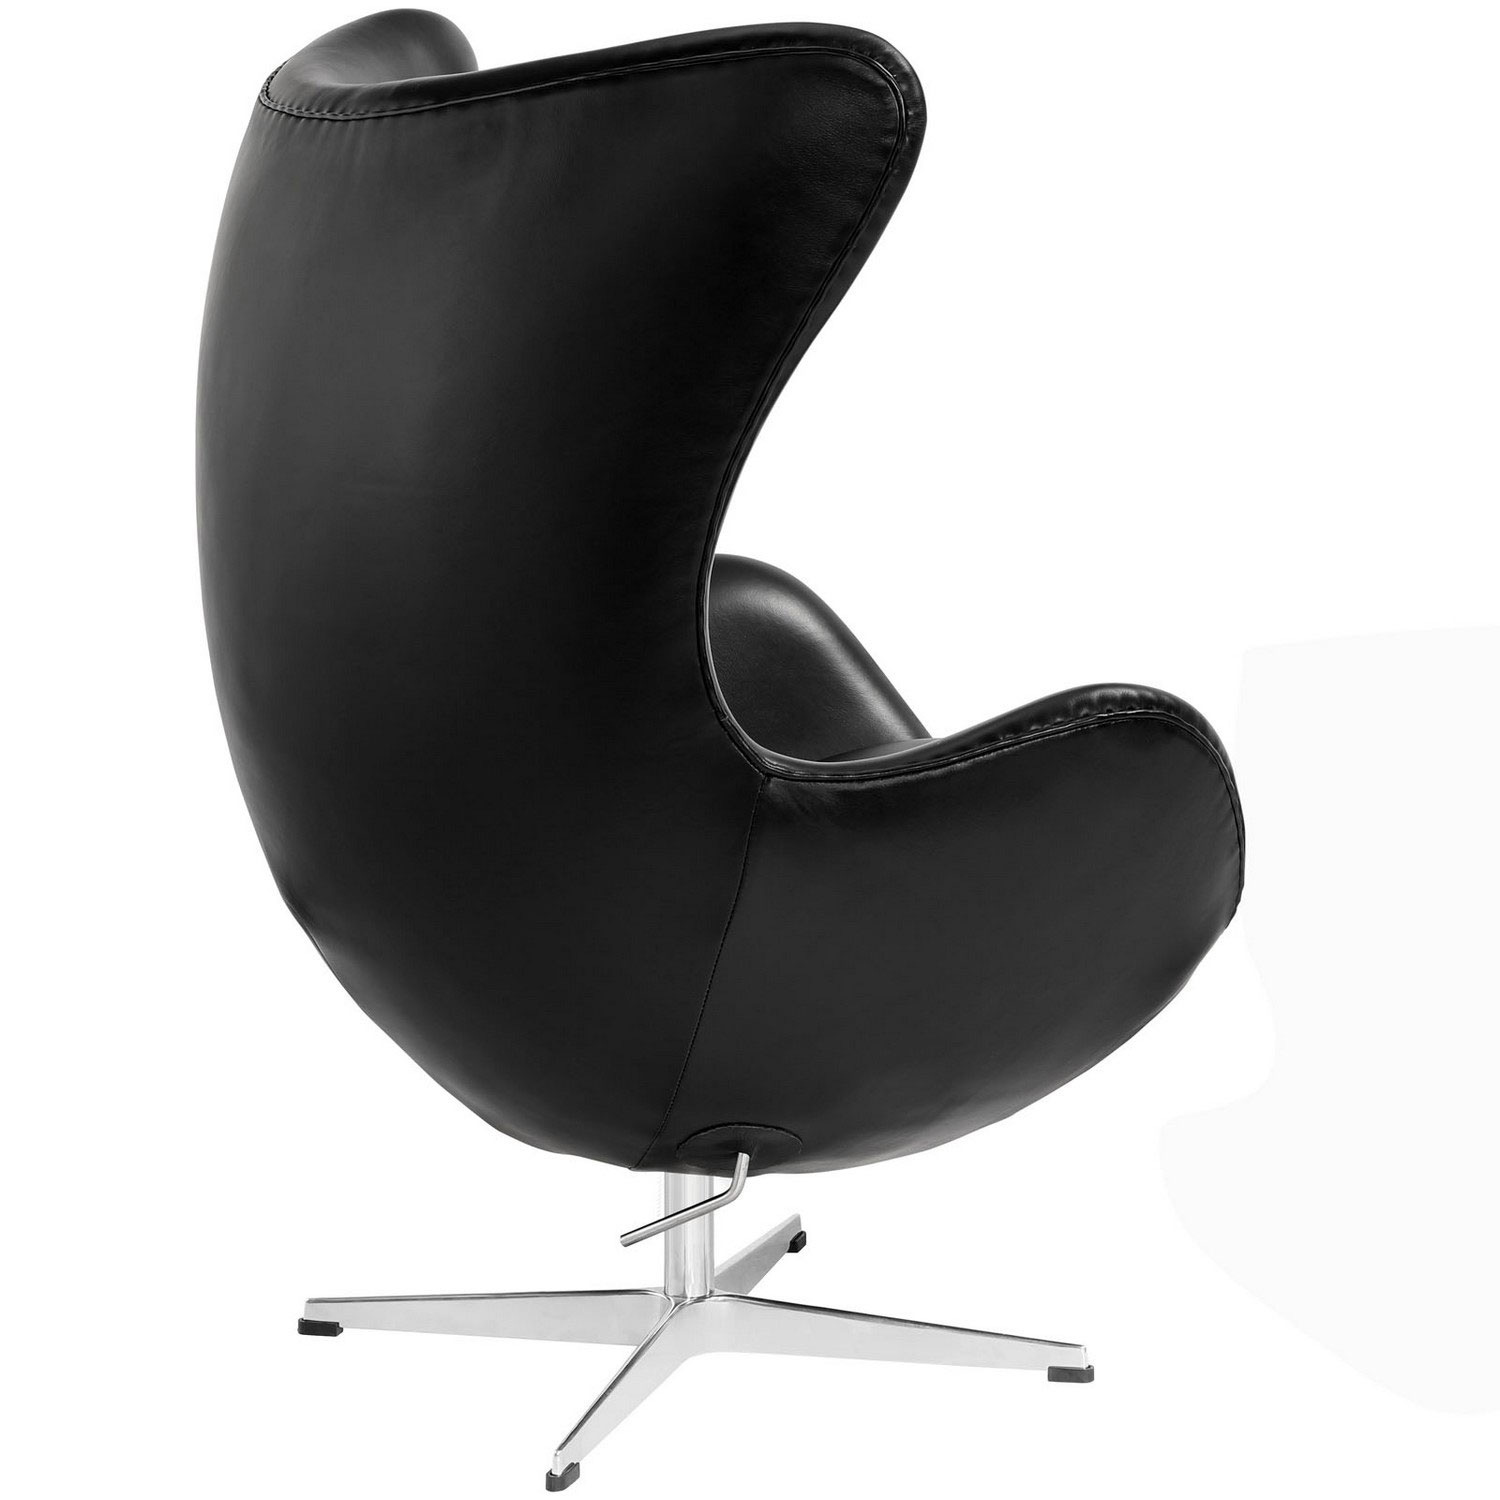 Modway Glove Leather Lounge Chair - Black